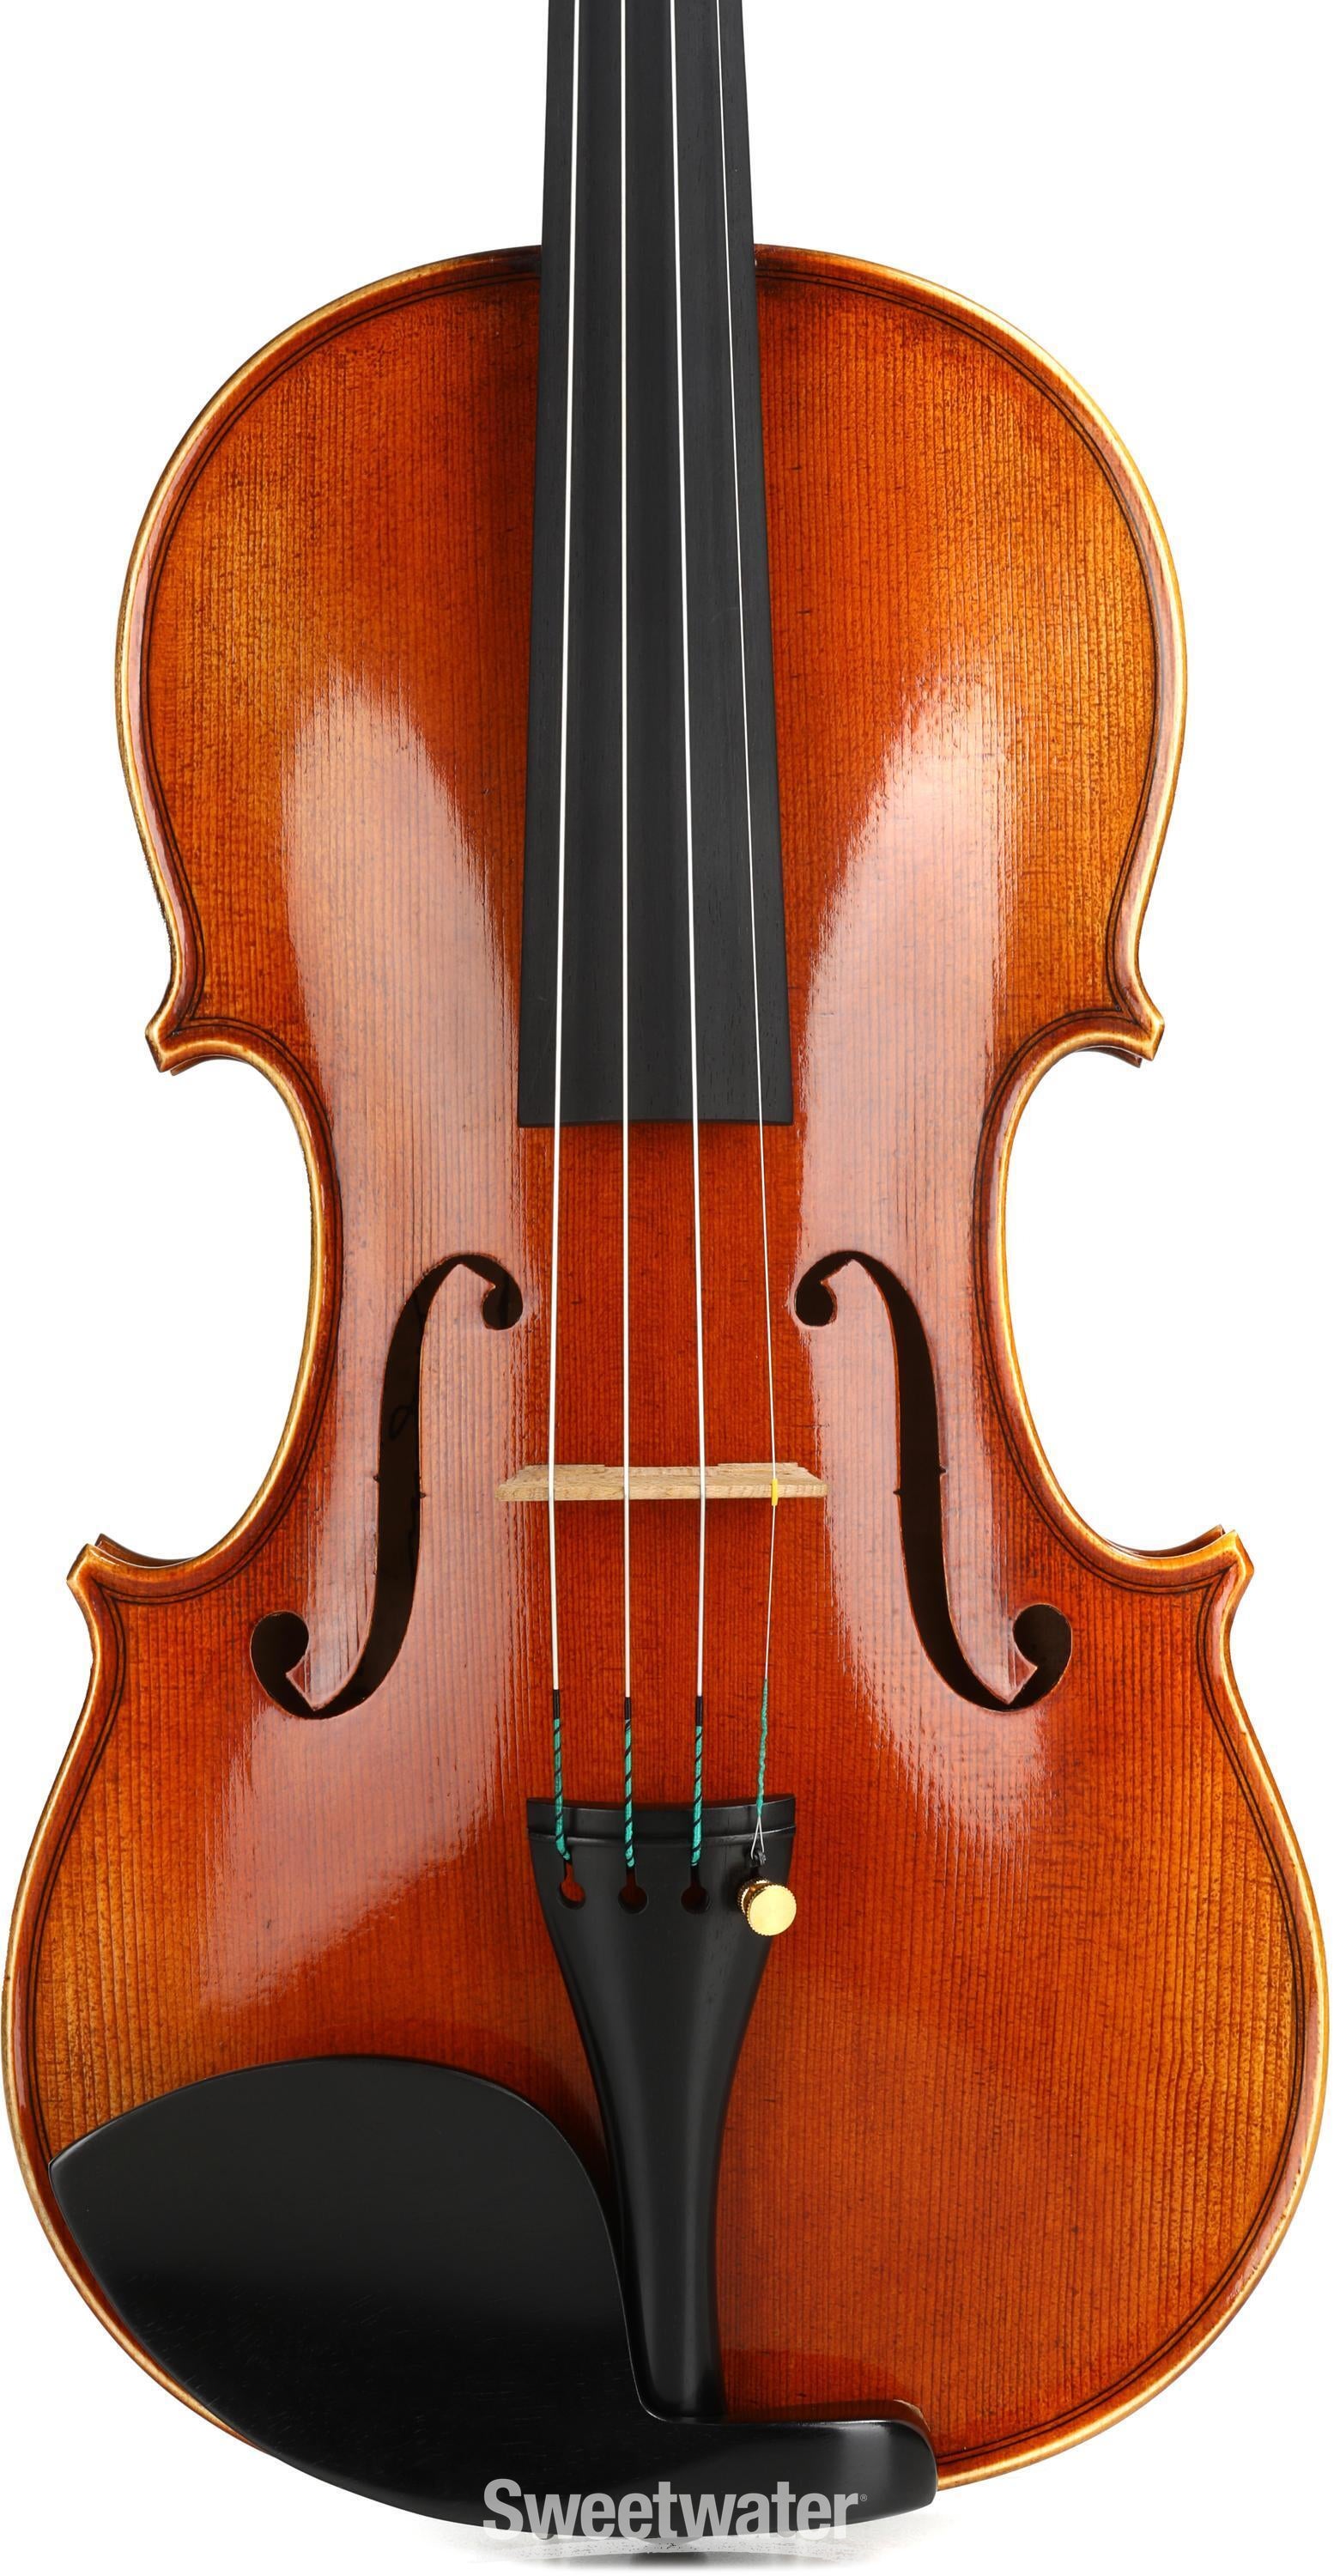 70/2 Violin - 4/4 Size - Sweetwater